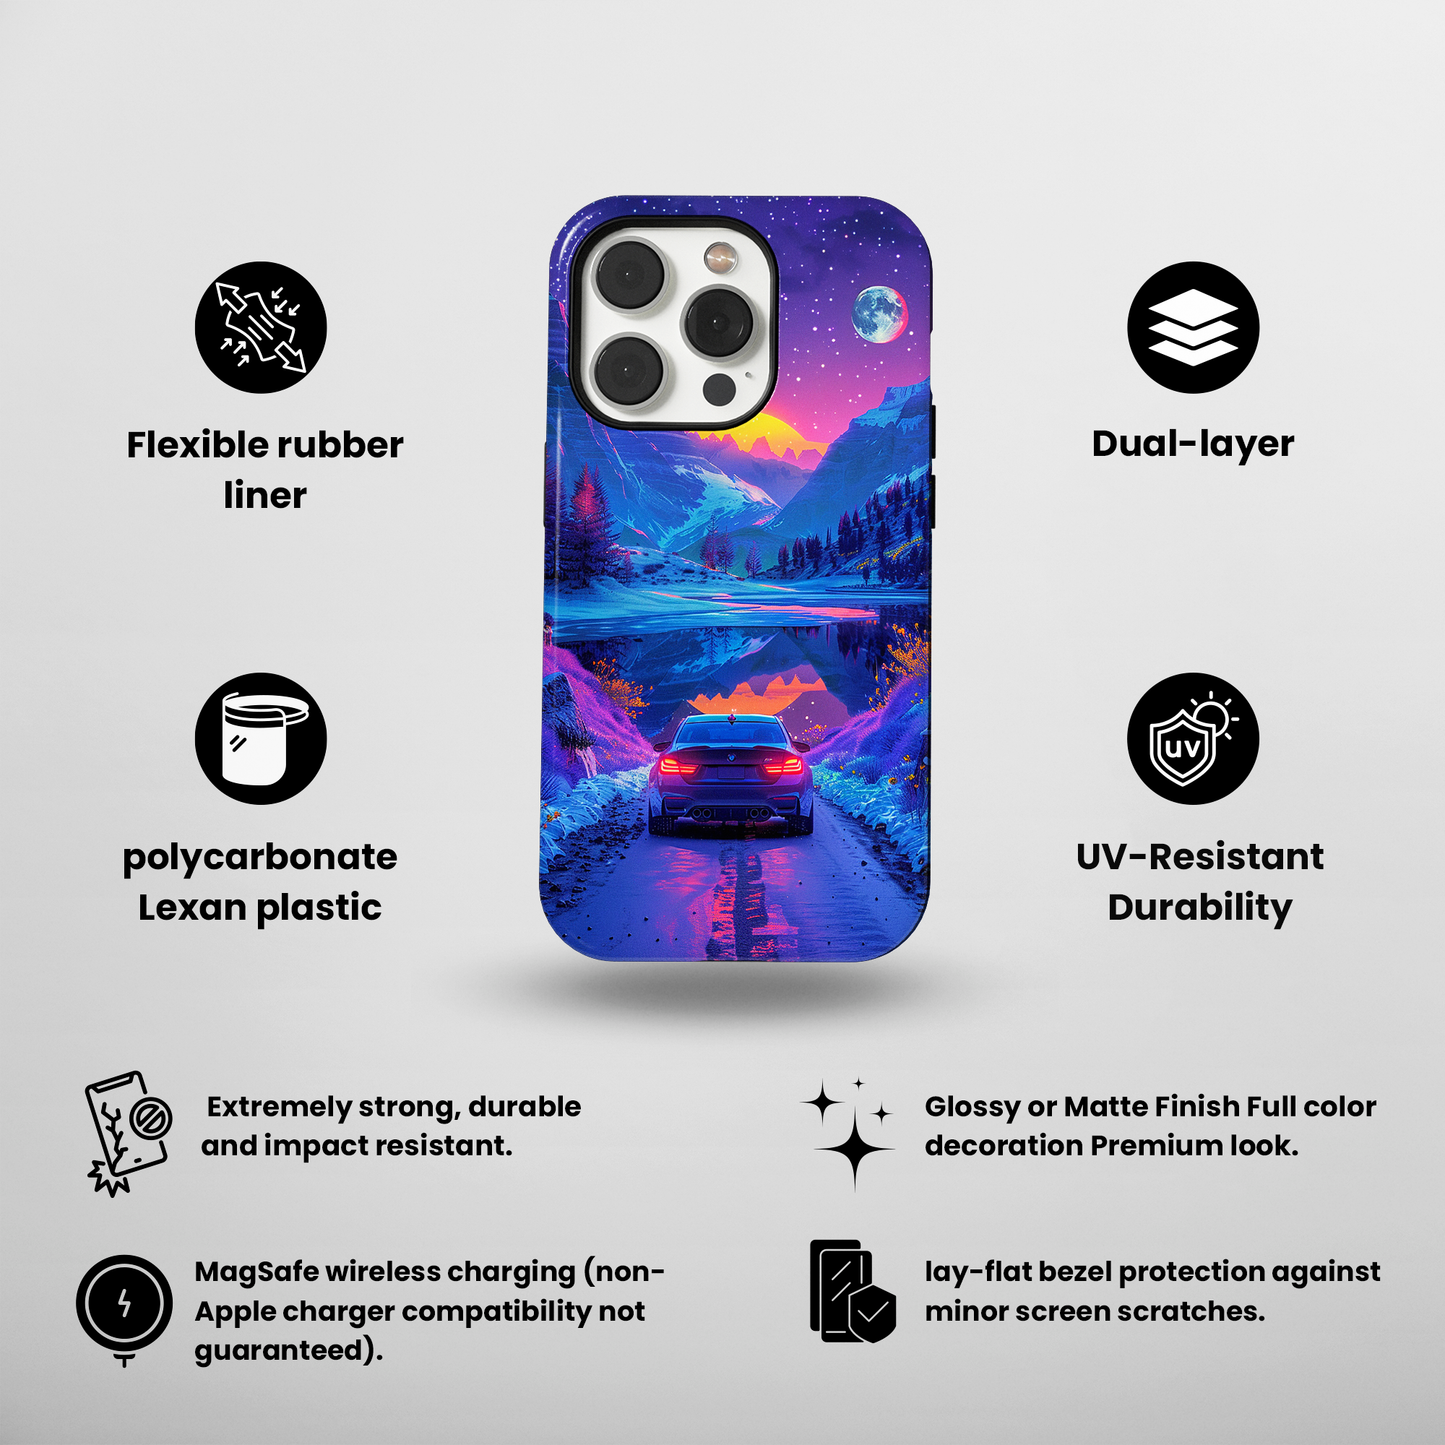 Celestial Drive (iPhone MagSafe Case)Celestial Drive Revolutionize your iPhone's look and feel with RIMA Tough Phone Case – ultimate protection meets elegant style for iPhone 11-15. Grab yours now! 🛡️?imaGallery